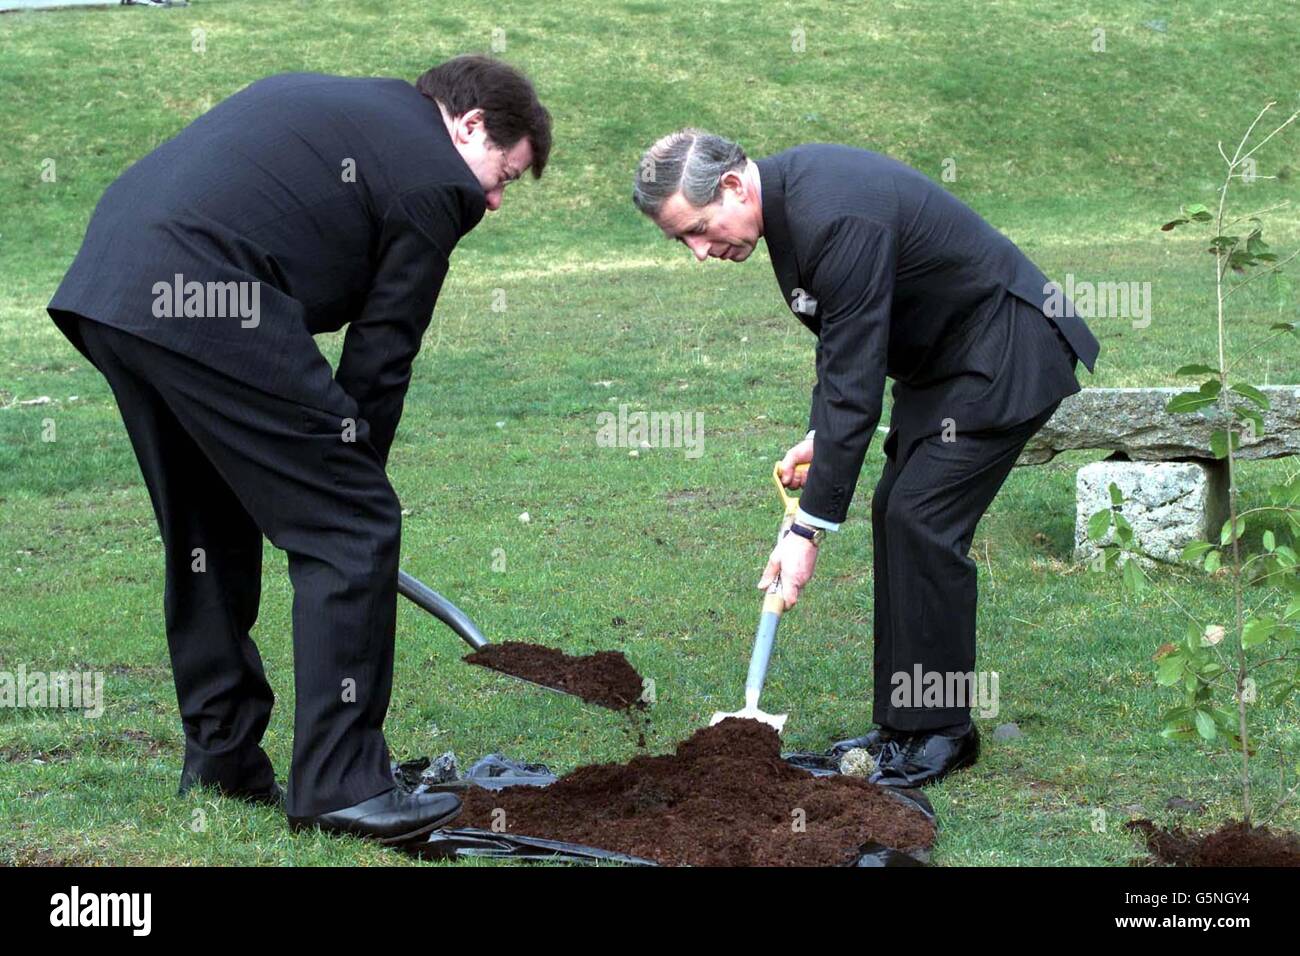 The Prince of Wales at The Glencree Reconciliation Centre in Co Wicklow, planting a tree with Brian Cowan, Republic of Ireland's Minister for Foreign Affairs (L), on the final day of his two day visit to the Republic. * The centre is a one-time British Army barracks that is now a headquarters for reconciliation. Stock Photo